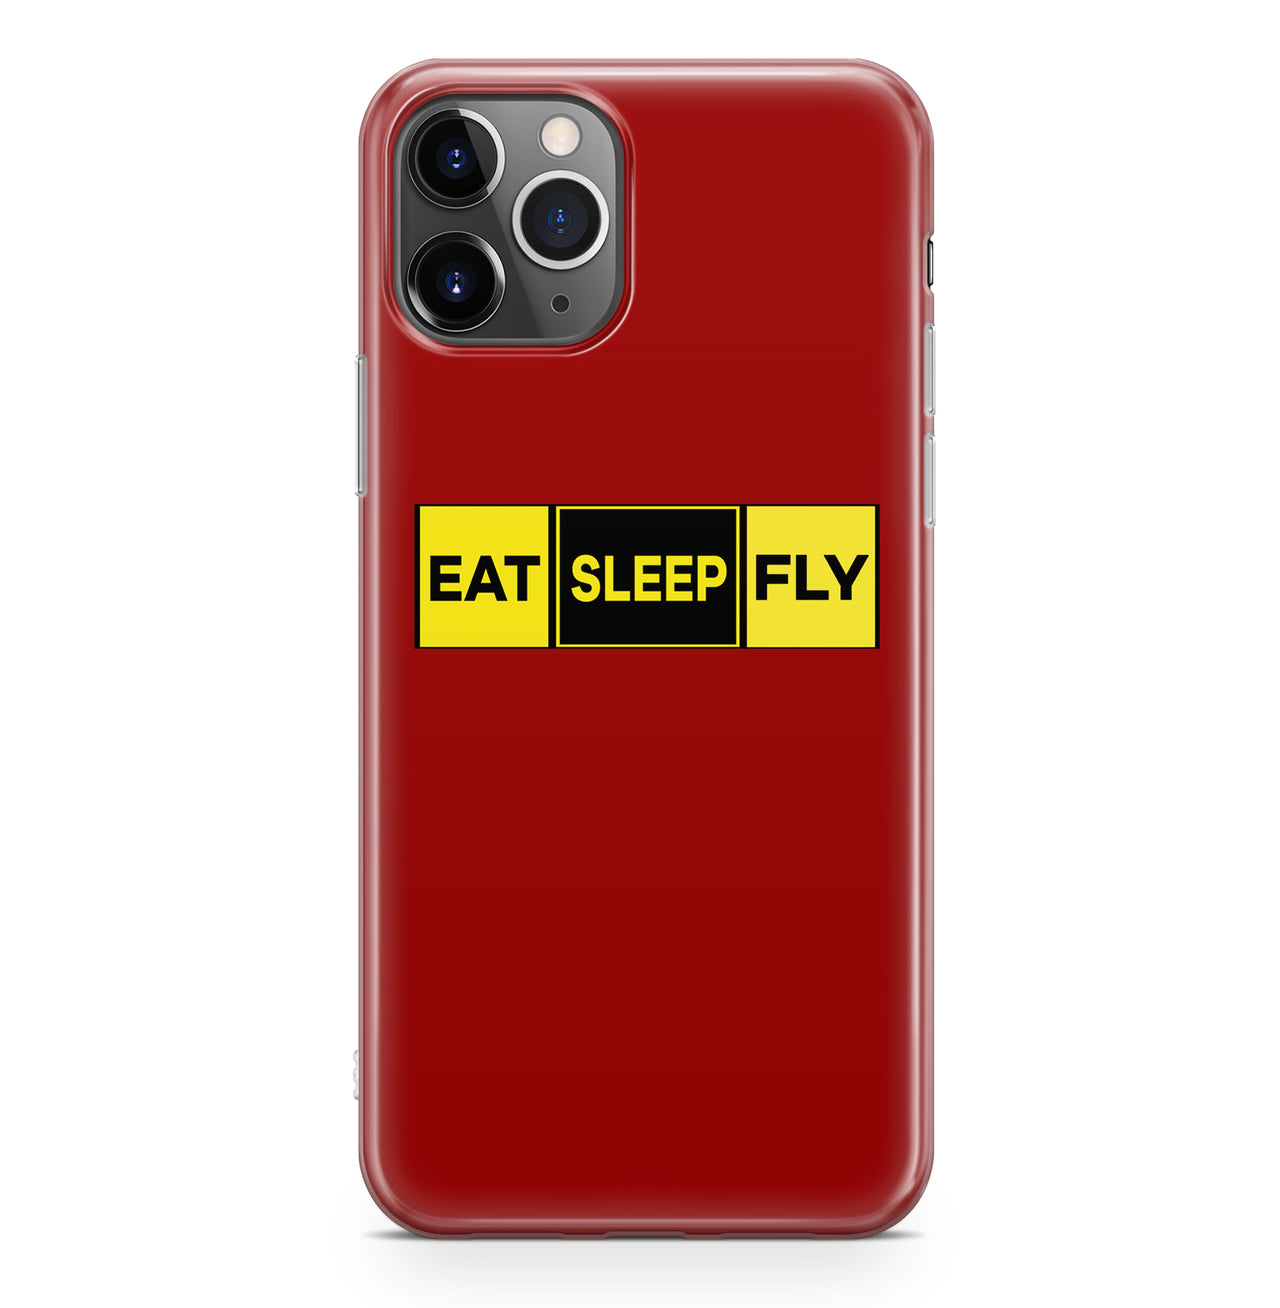 Eat Sleep Fly (Colourful) Designed iPhone Cases